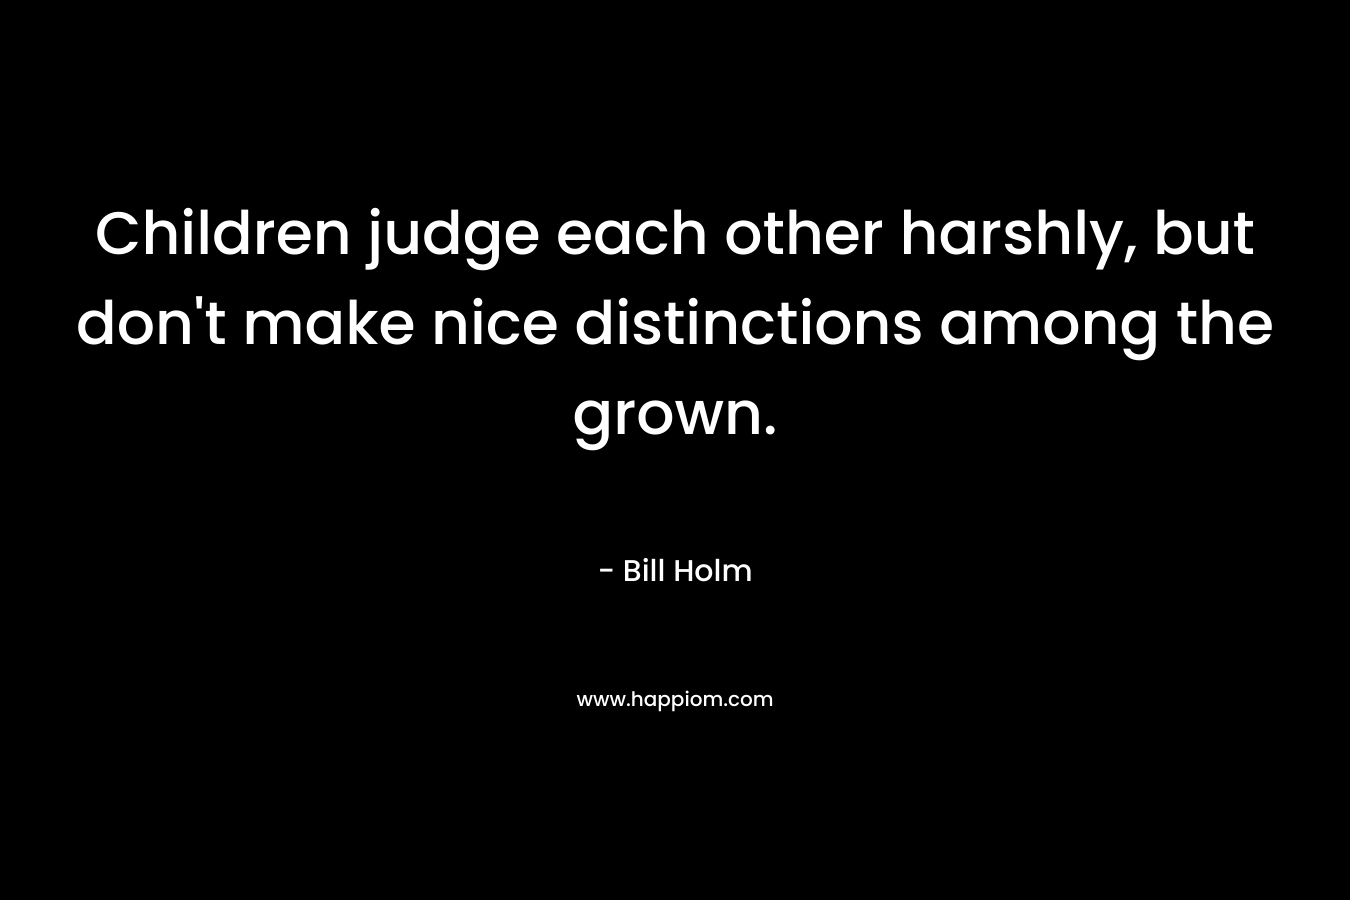 Children judge each other harshly, but don't make nice distinctions among the grown.